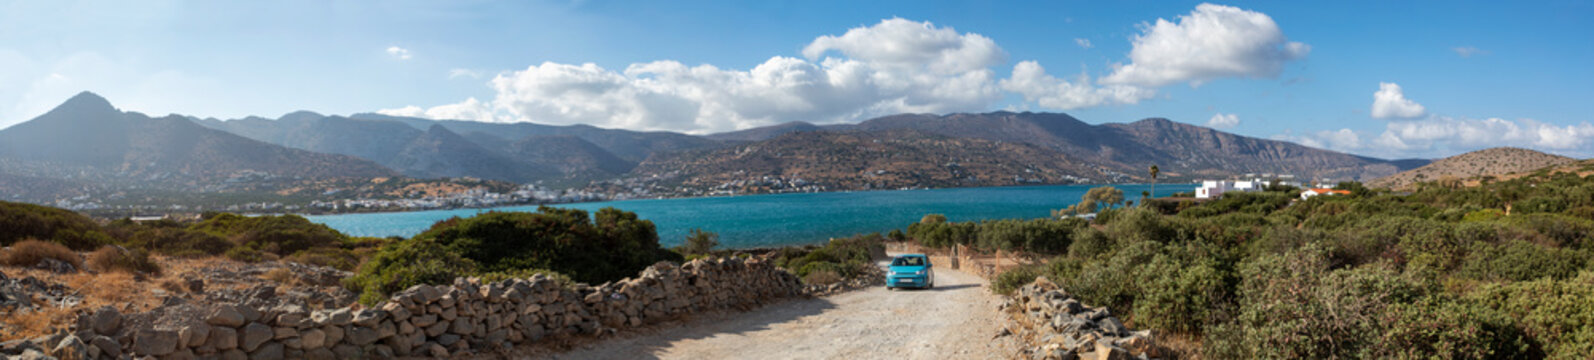 blurred panoramic view of the sunken city of Olus, on the island of Crete on a sunny day, horizontal